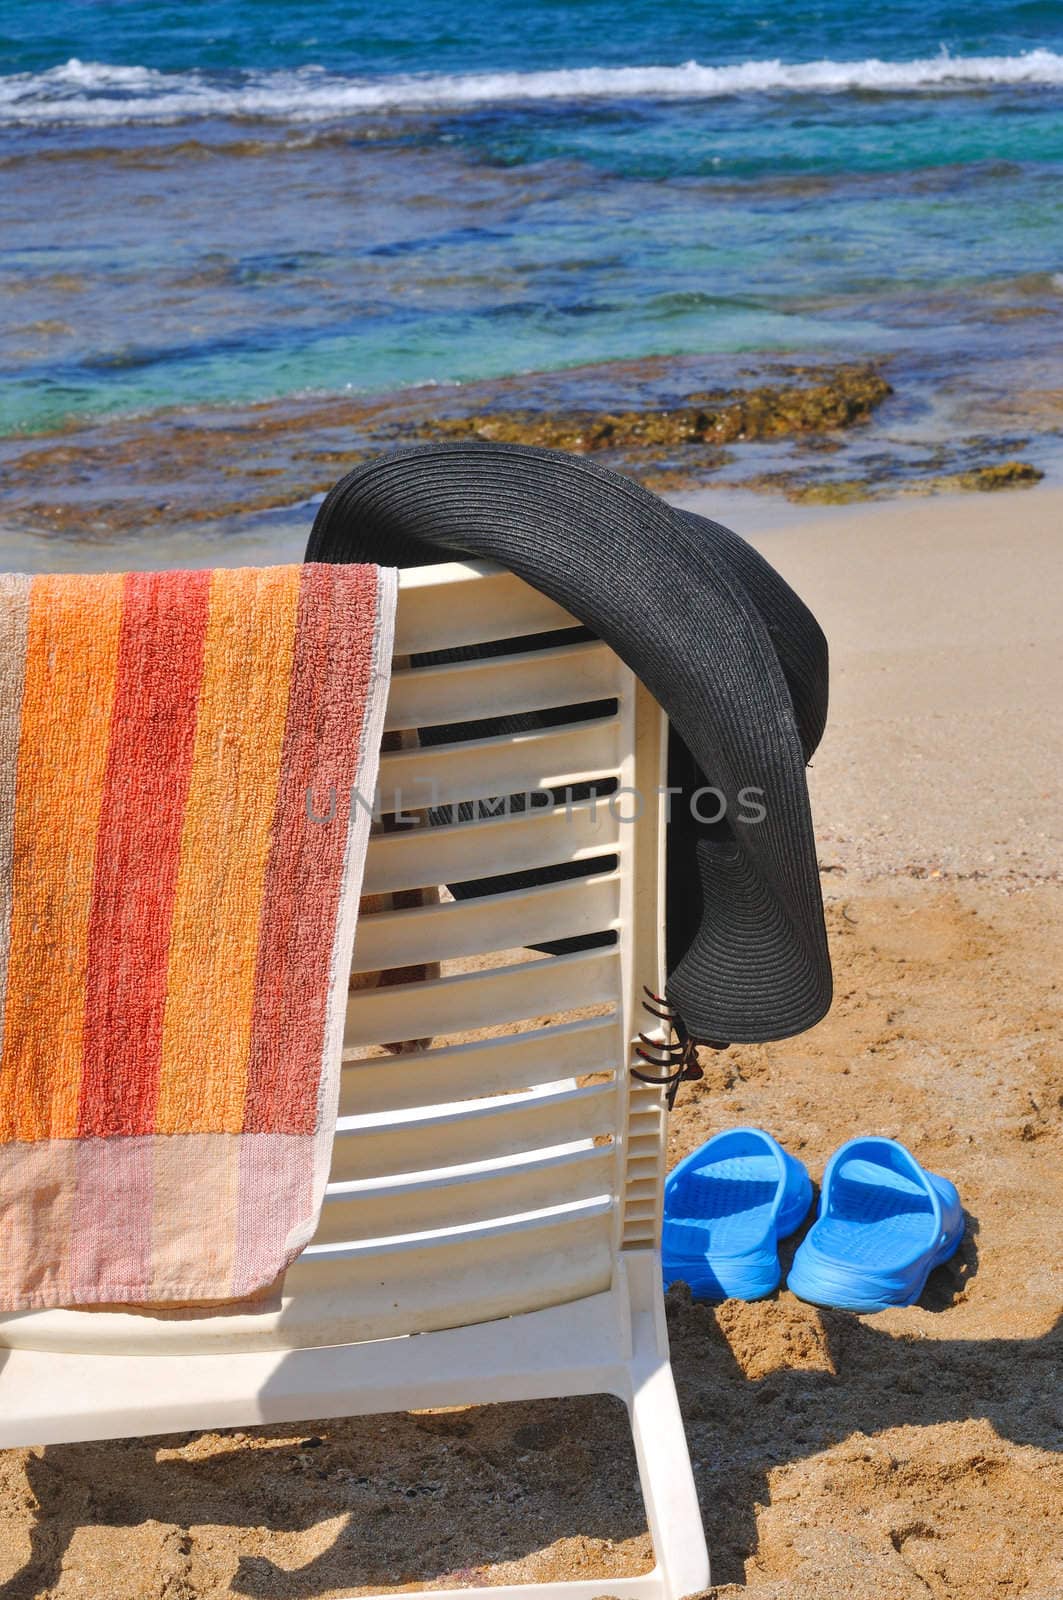 
A hat, a towel hanging on a chair on the beach by the sea